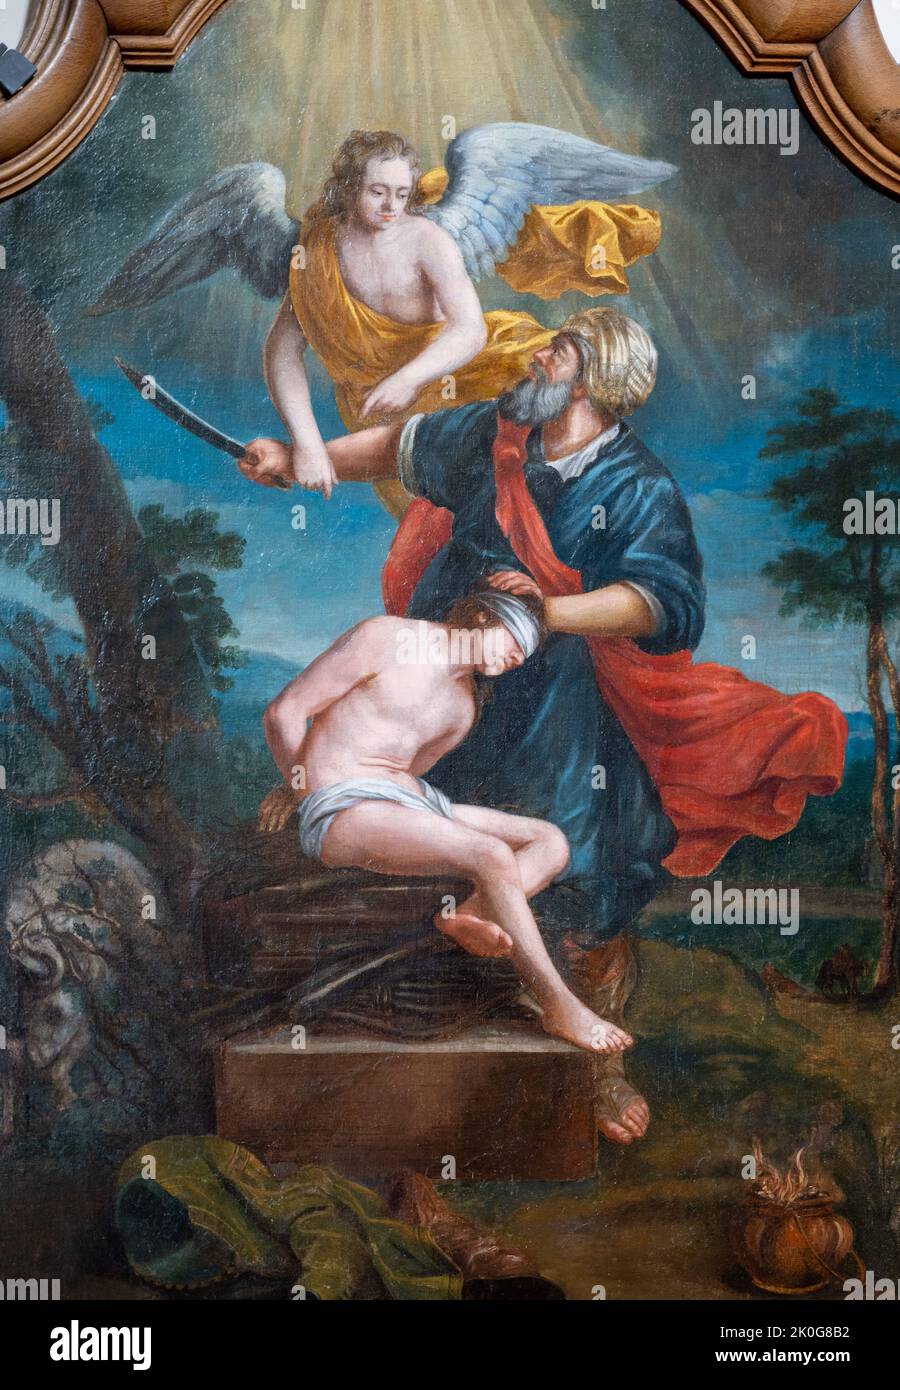 Painting of Abraham about to sacrifice his son Isaac on the Mount Moriah. Church of Saints Cosmas & Damian in Clervaux, Luxembourg. Stock Photo